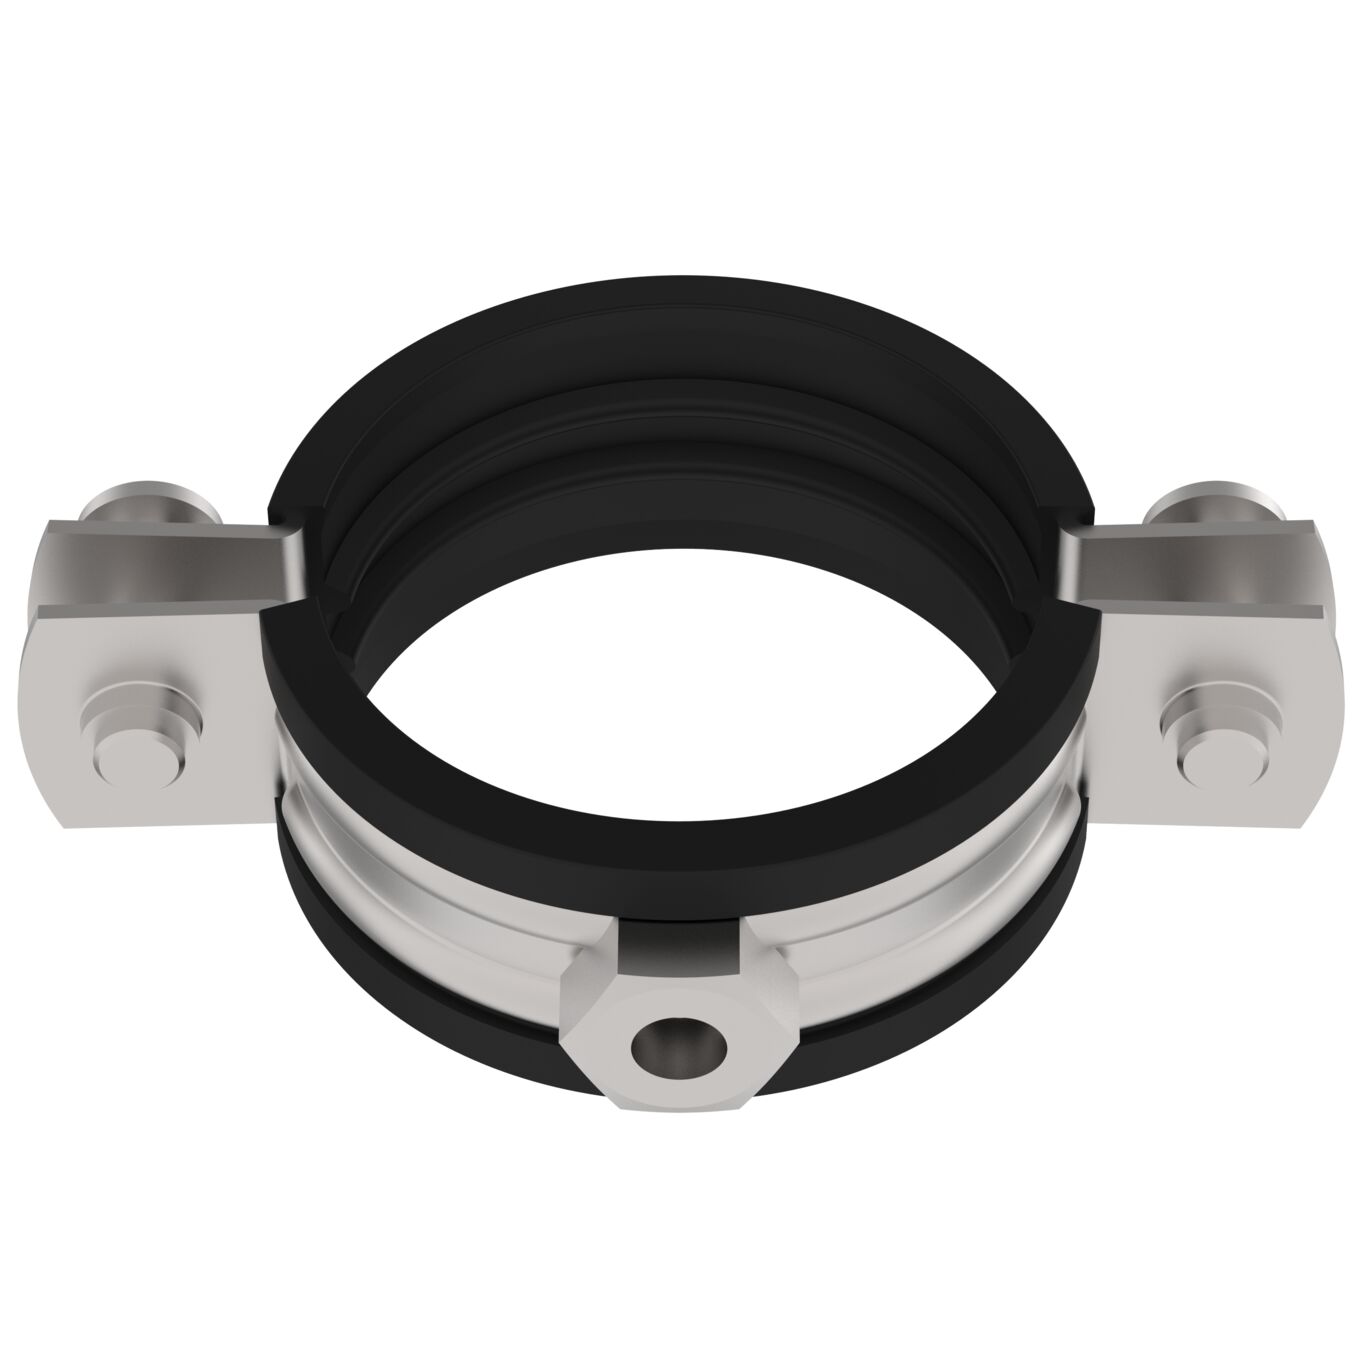 Product Image - Pipe hanger-EPDM-noise reducing